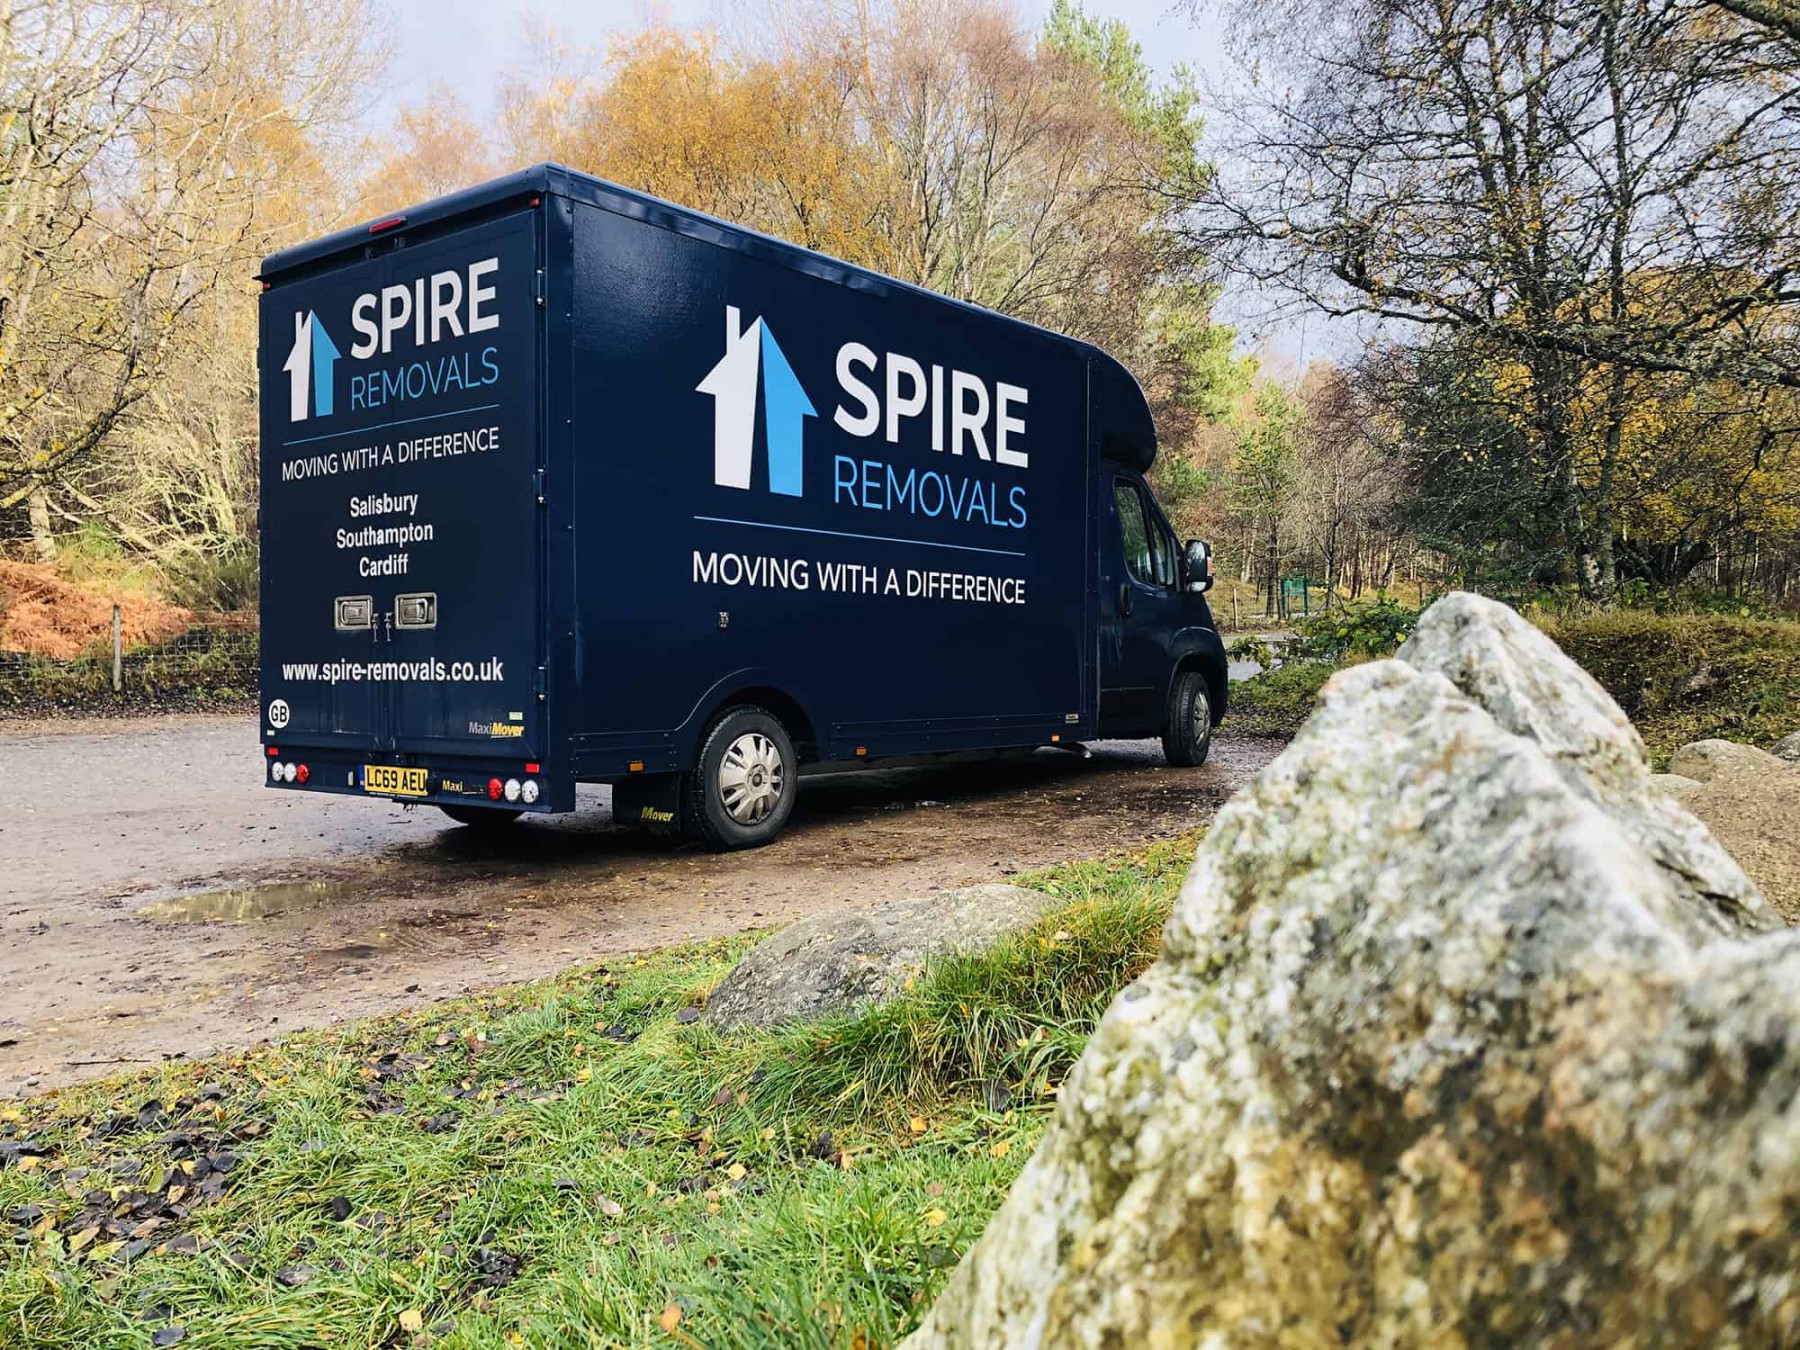 Spire Removals van out and about during a house move in neighbouring counties of Hampshire & Wiltshire.